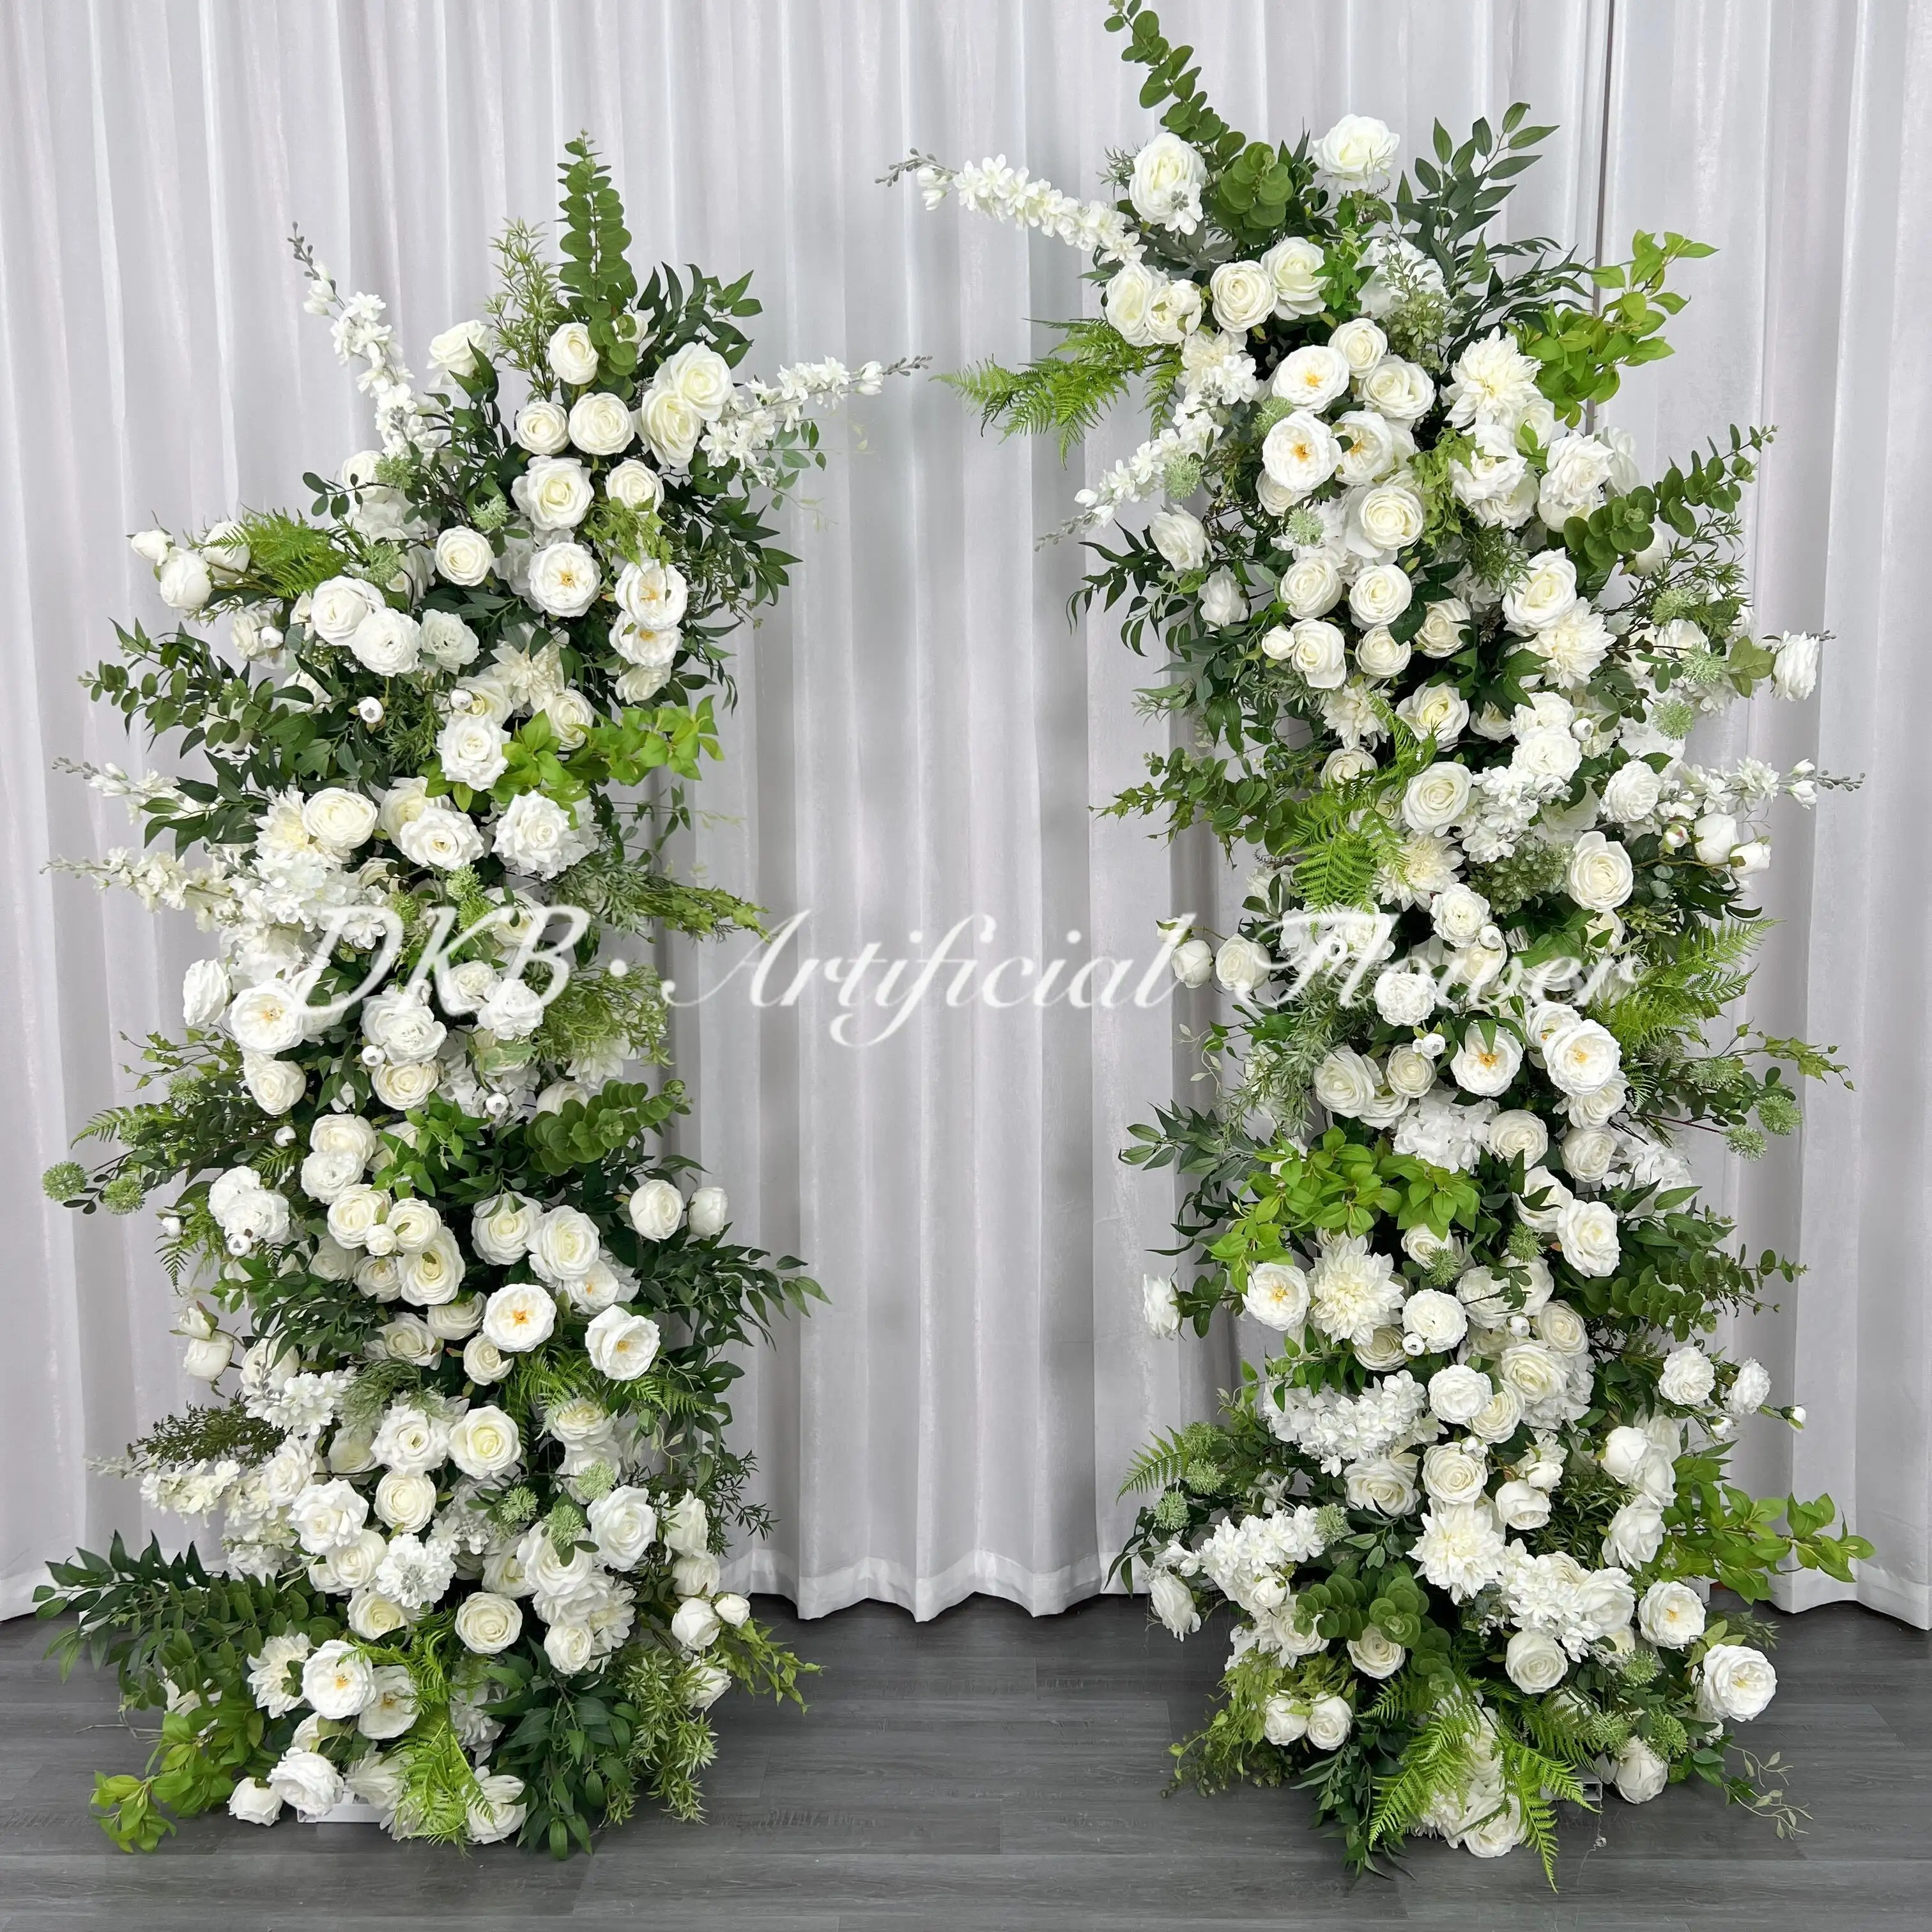 DKB new wedding greenery silk floral arch with white florals for wedding arch